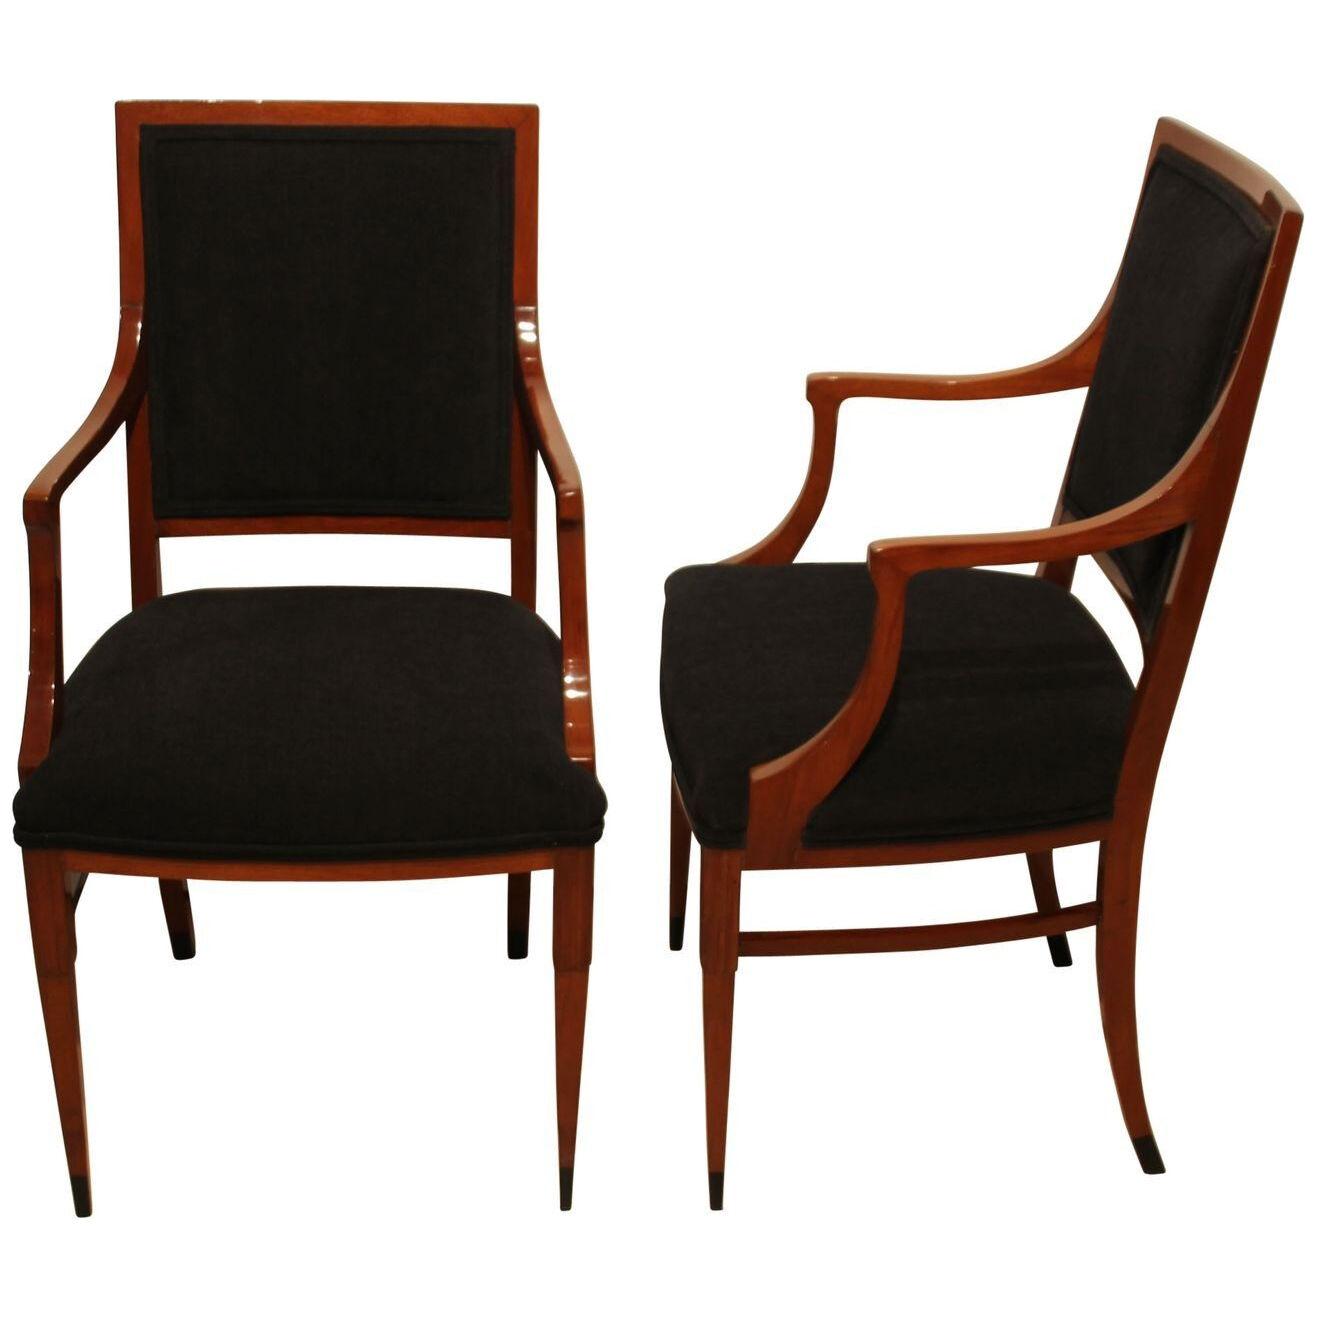 Pair of Empire Style Armchairs, Solid Mahogany, Austria, Vienna, 19th C.